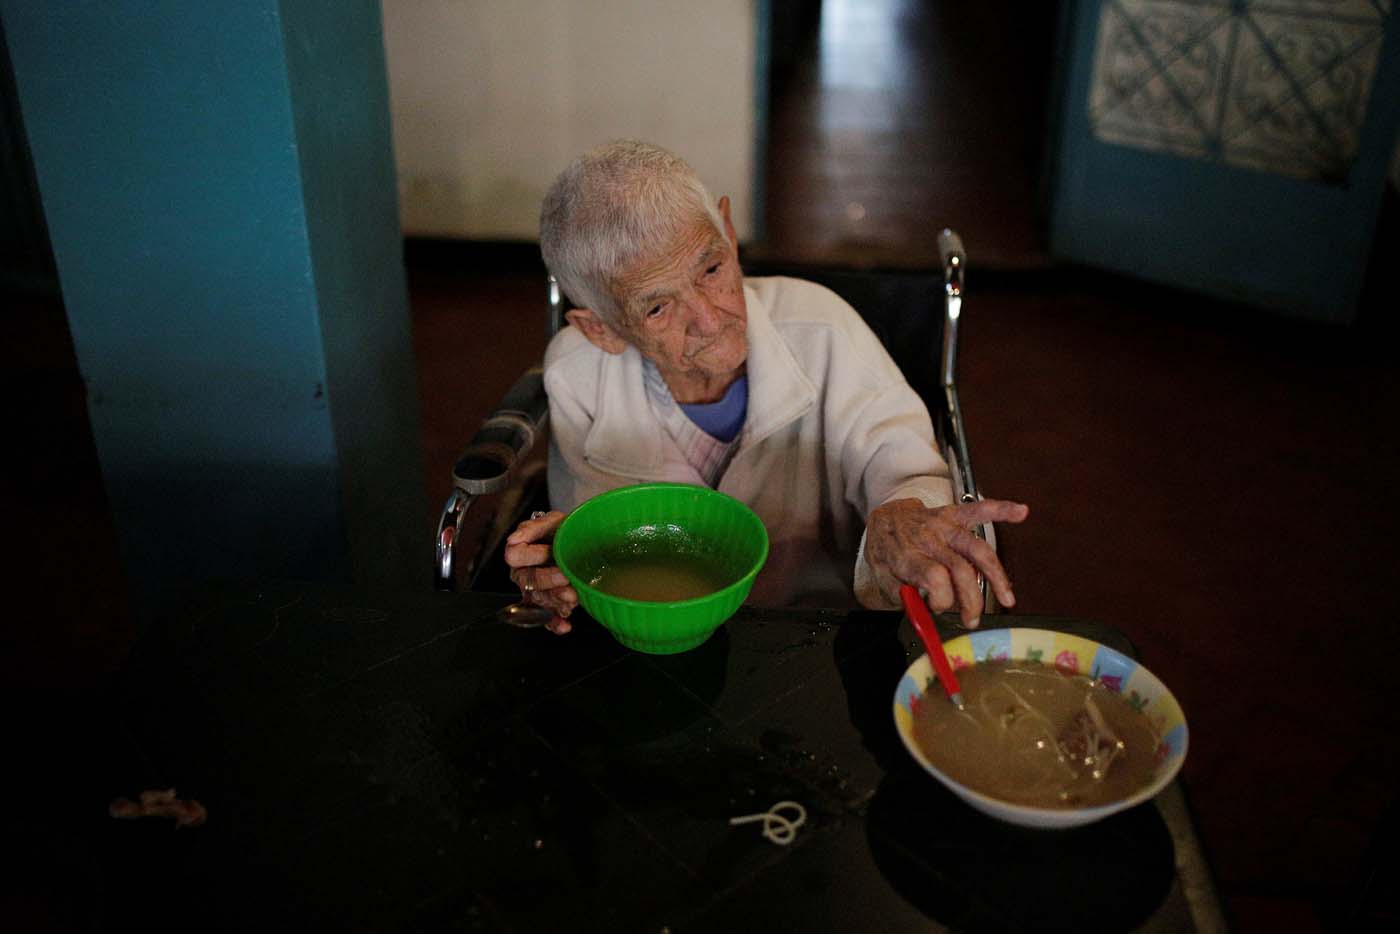 A woman grabs a bowl of soup donated by La Sibilla restaurant, member of the "Full Stomach, Happy Heart" (Barriga llena, corazon contento) charity, at the Mother Teresa of Calcutta nursing home, in Caracas, Venezuela February 23, 2017. Picture taken February 23, 2017. REUTERS/Marco Bello